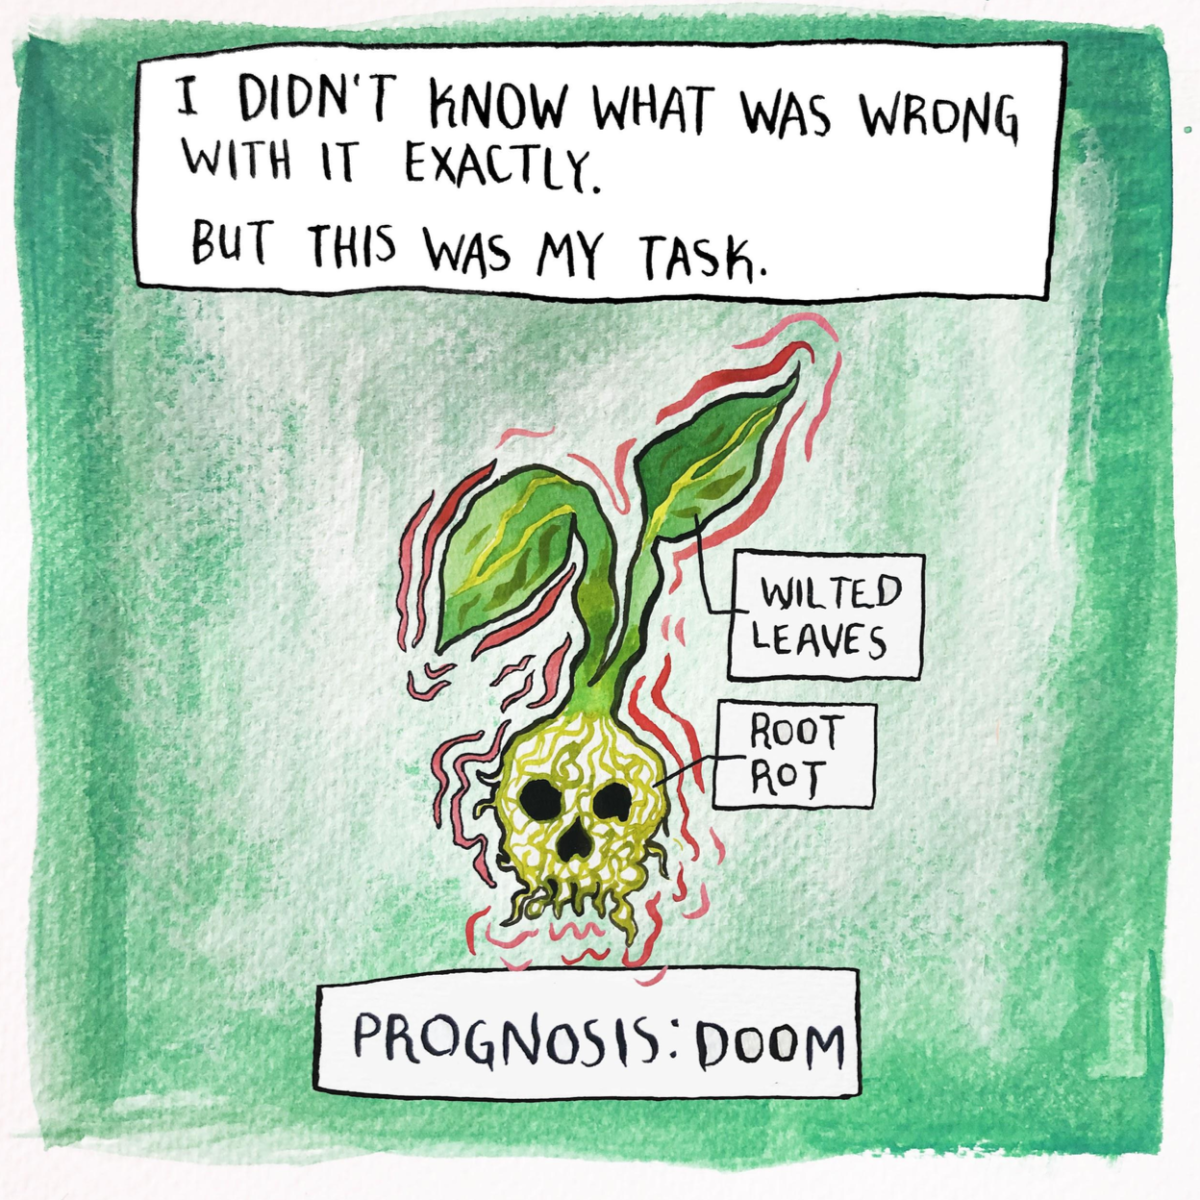 "I don't know what was wrong with it exactly. But this was my task. Wilted leaves, root rot. Prognosis: doom."